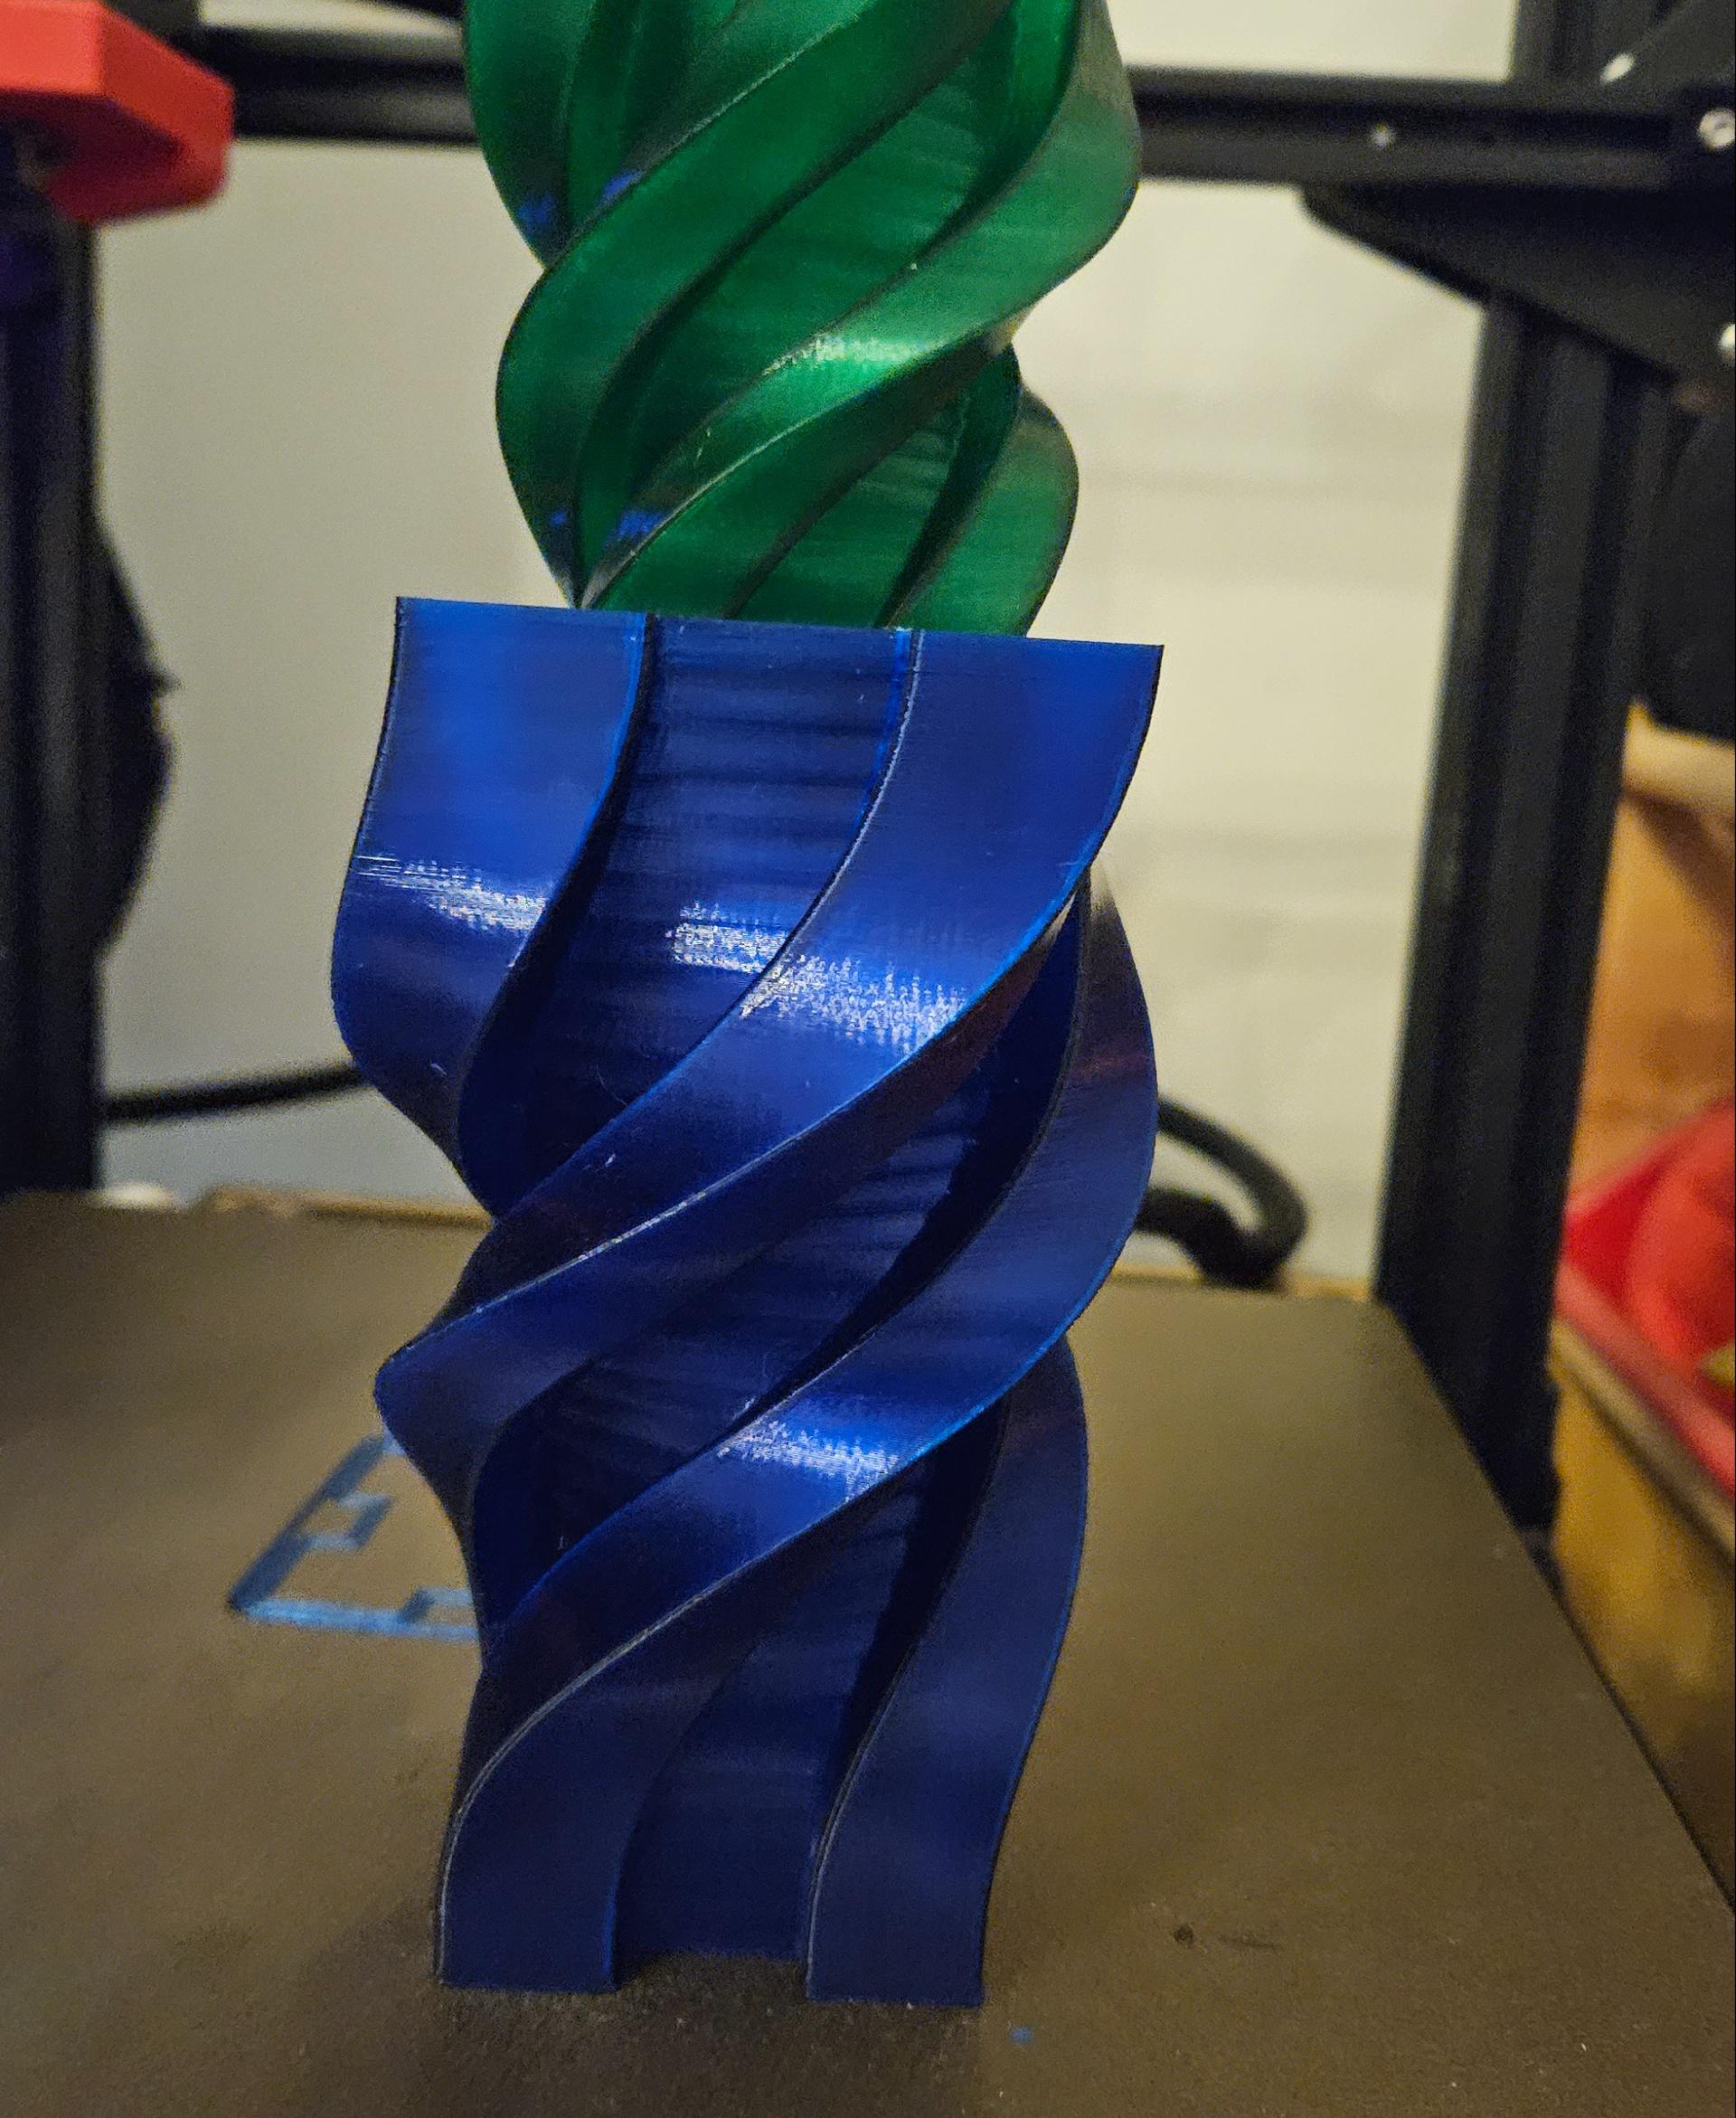 Helix Spiral - Helix spiral by Mel's 3D printed using CR-10 - 3d model